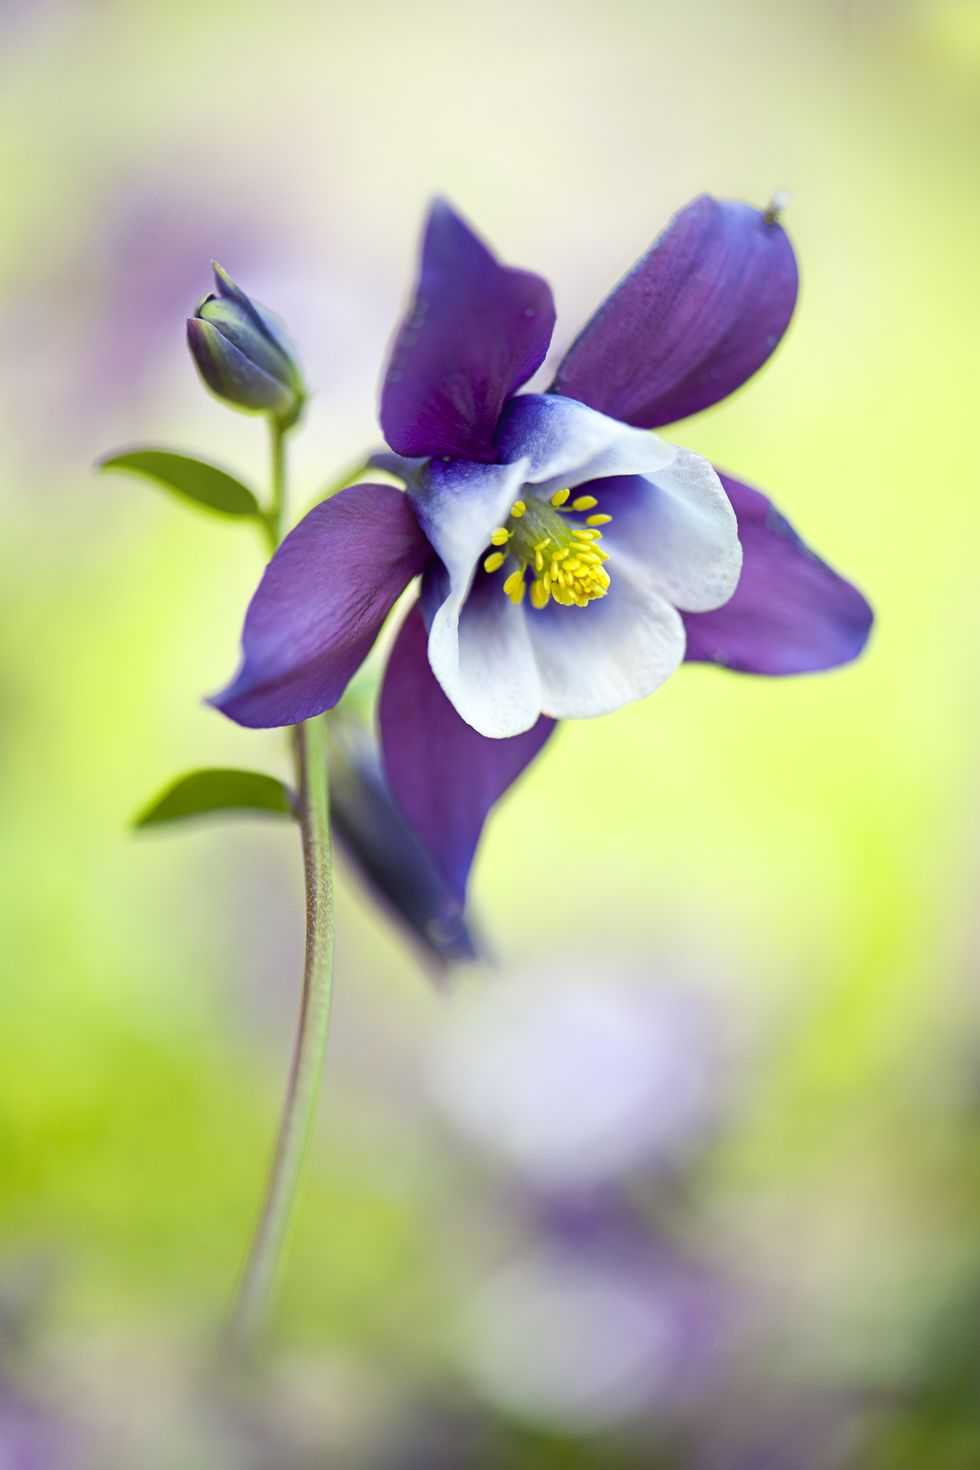 close up image of purple aquilegia flower also known as columbine or granny's bonnet